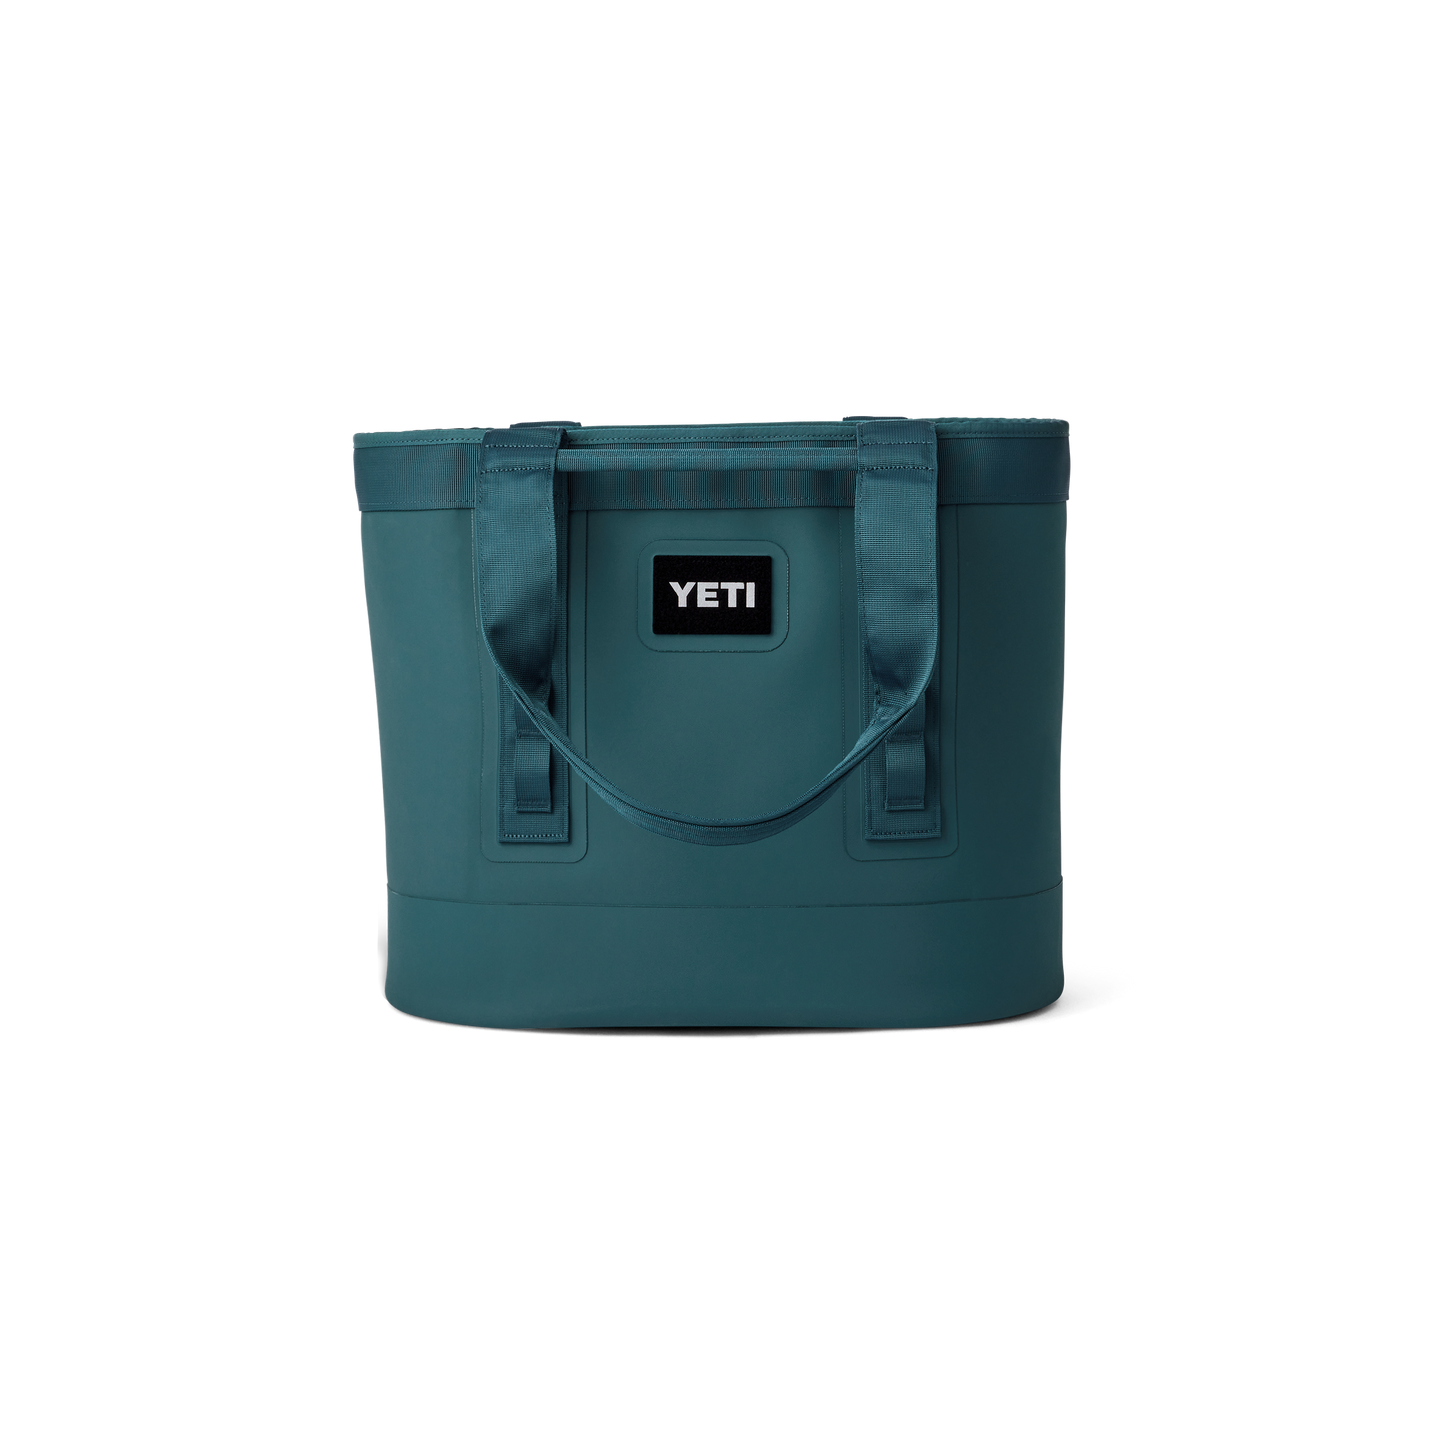 YETI Camino® 35 L Carryall Agave Teal